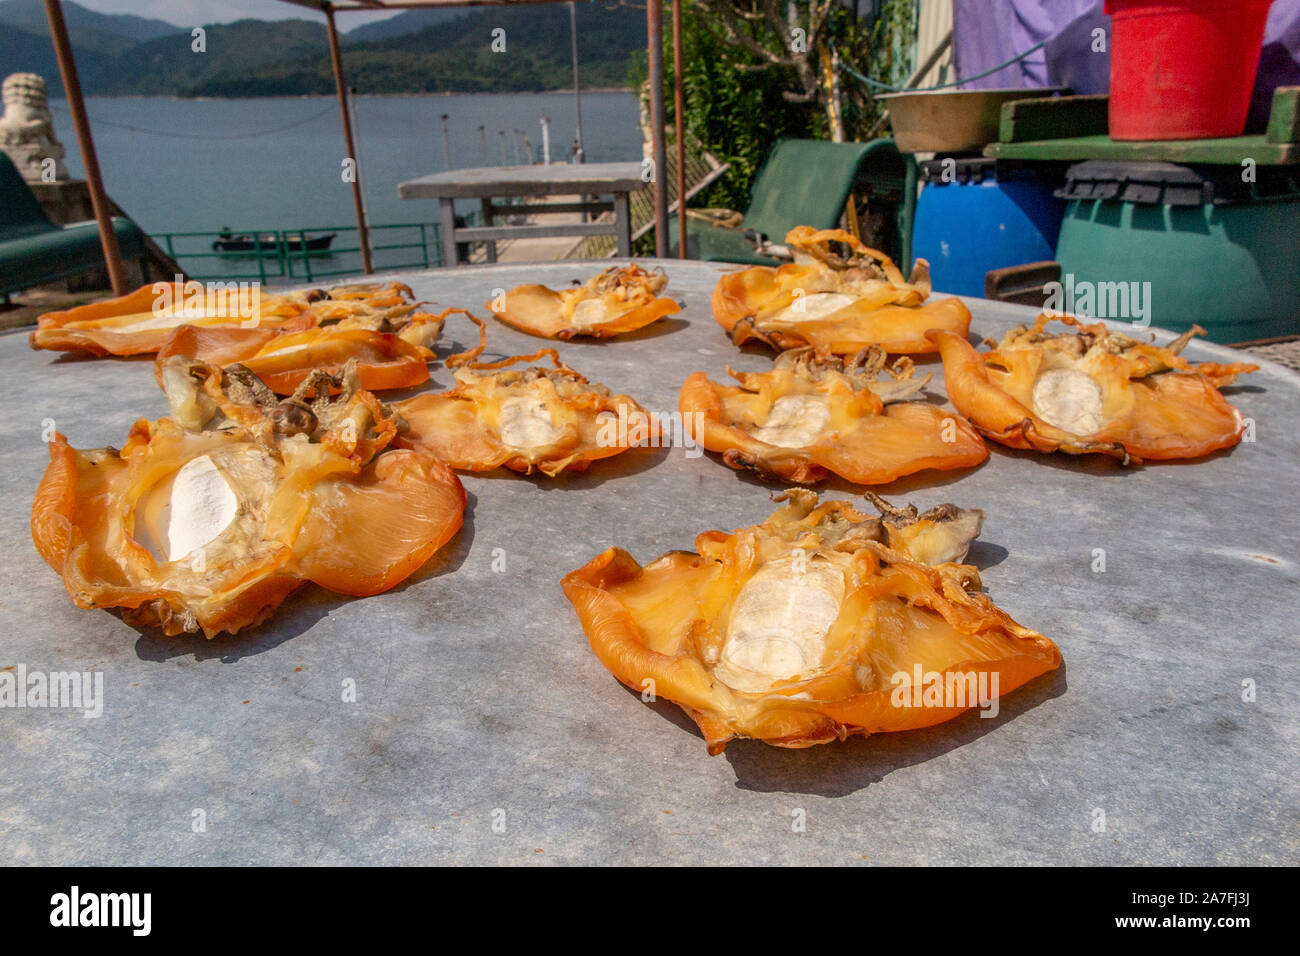 Jellyfish caught in the sea dry in the sun on a table in Tap Mun Island (also known as Grass Island) an outlying island in Hong Kong Stock Photo